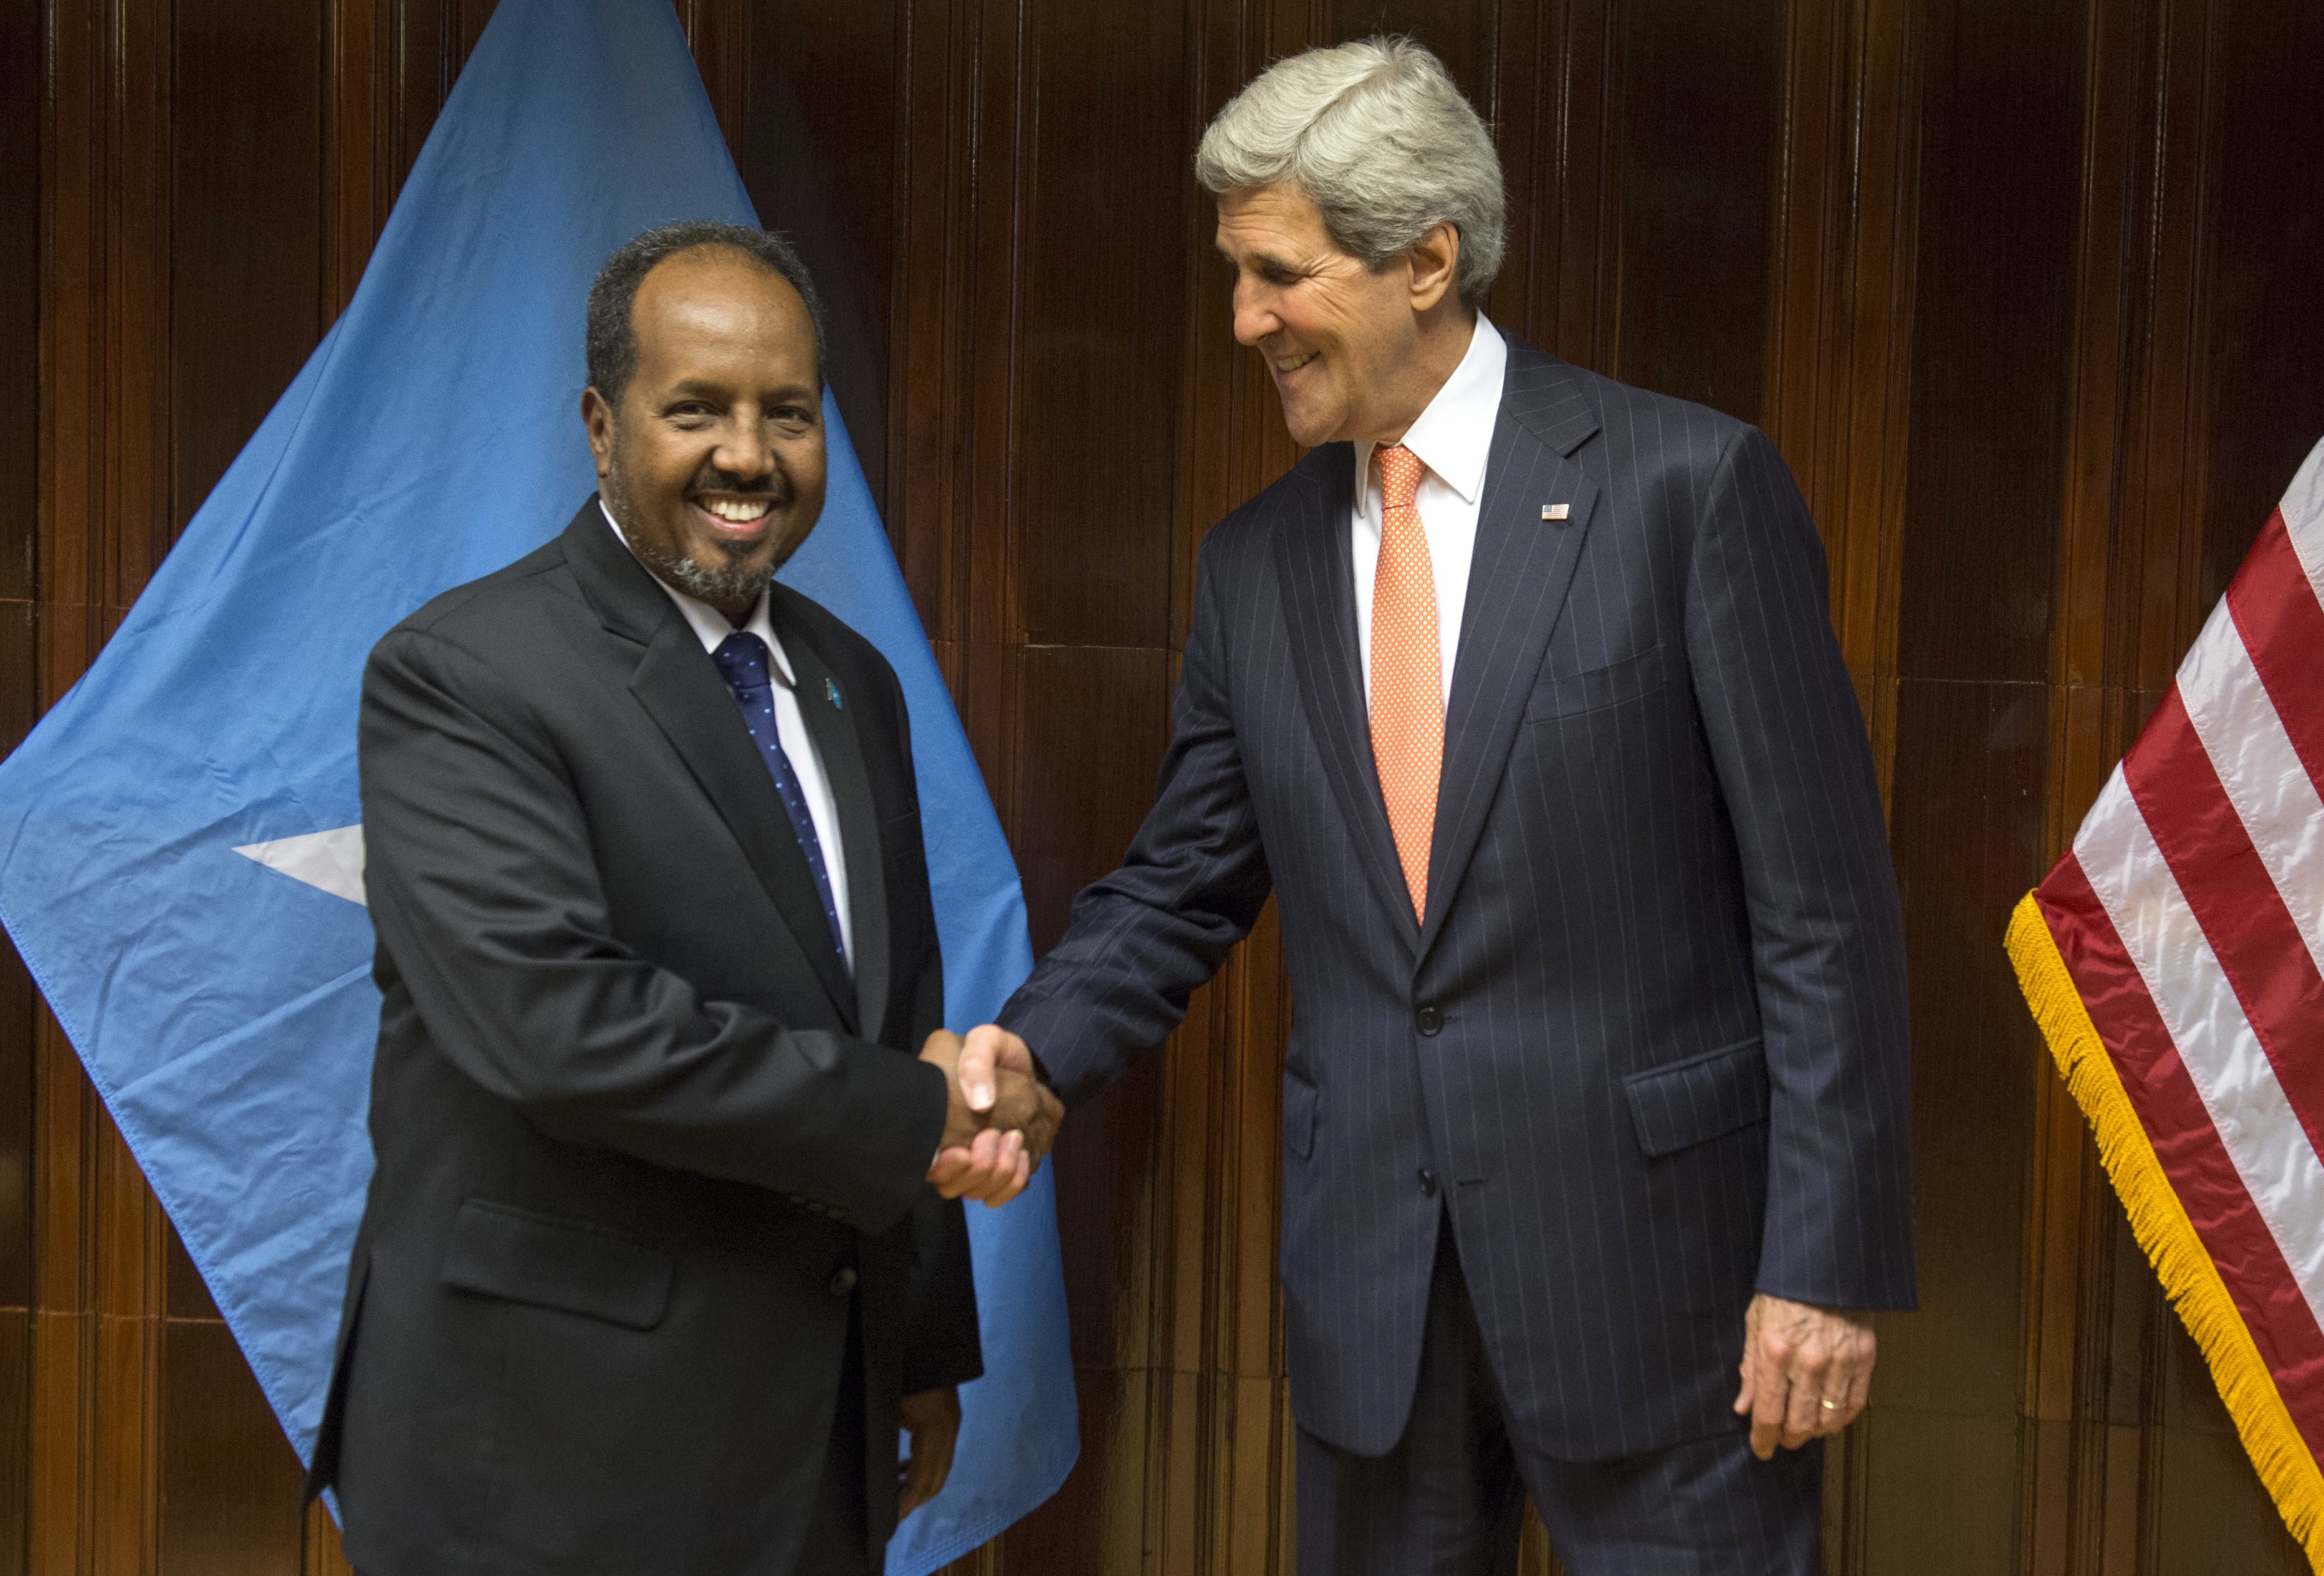 US Secretary of State John Kerry (R) and Somali President Hassan Sheikh Mohamud shake hands prior to a meeting at Addis Ababa Bole International Airport on May 3, 2014. (SAUL LOEB—AFP/Getty Images)